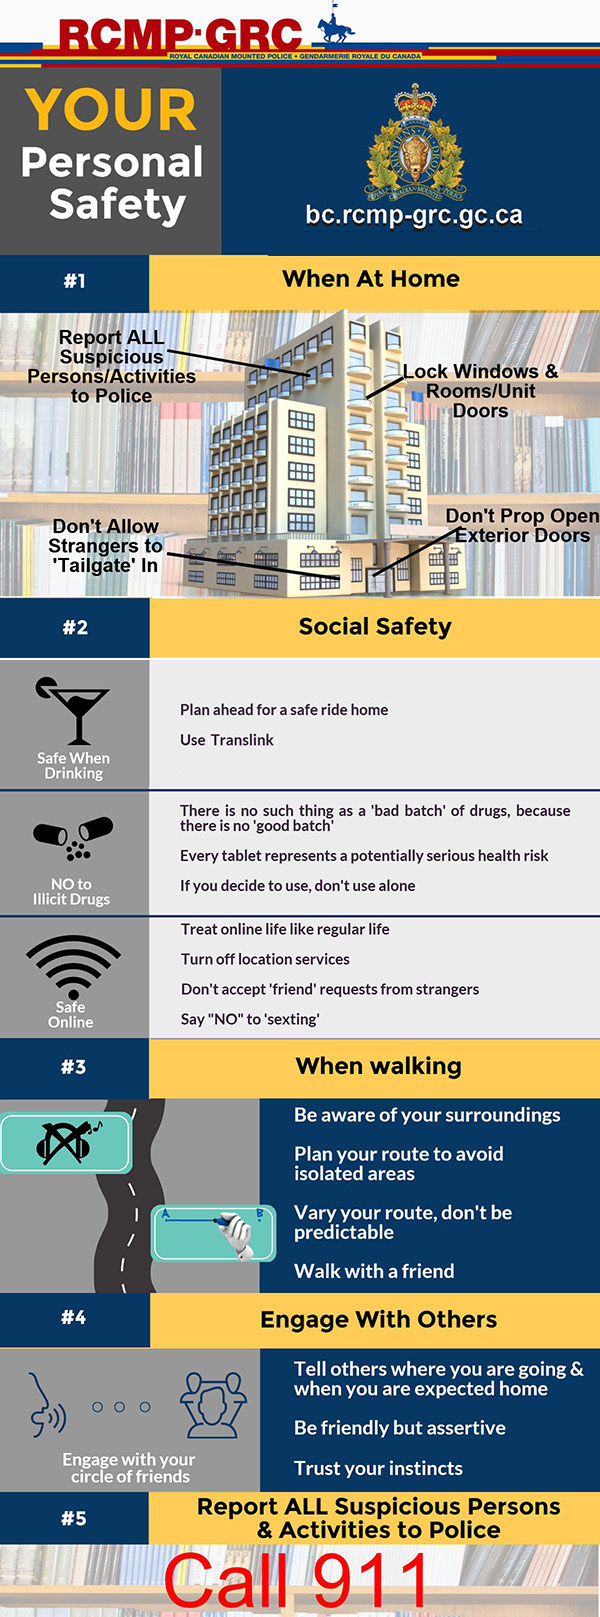 Personal Safety tips